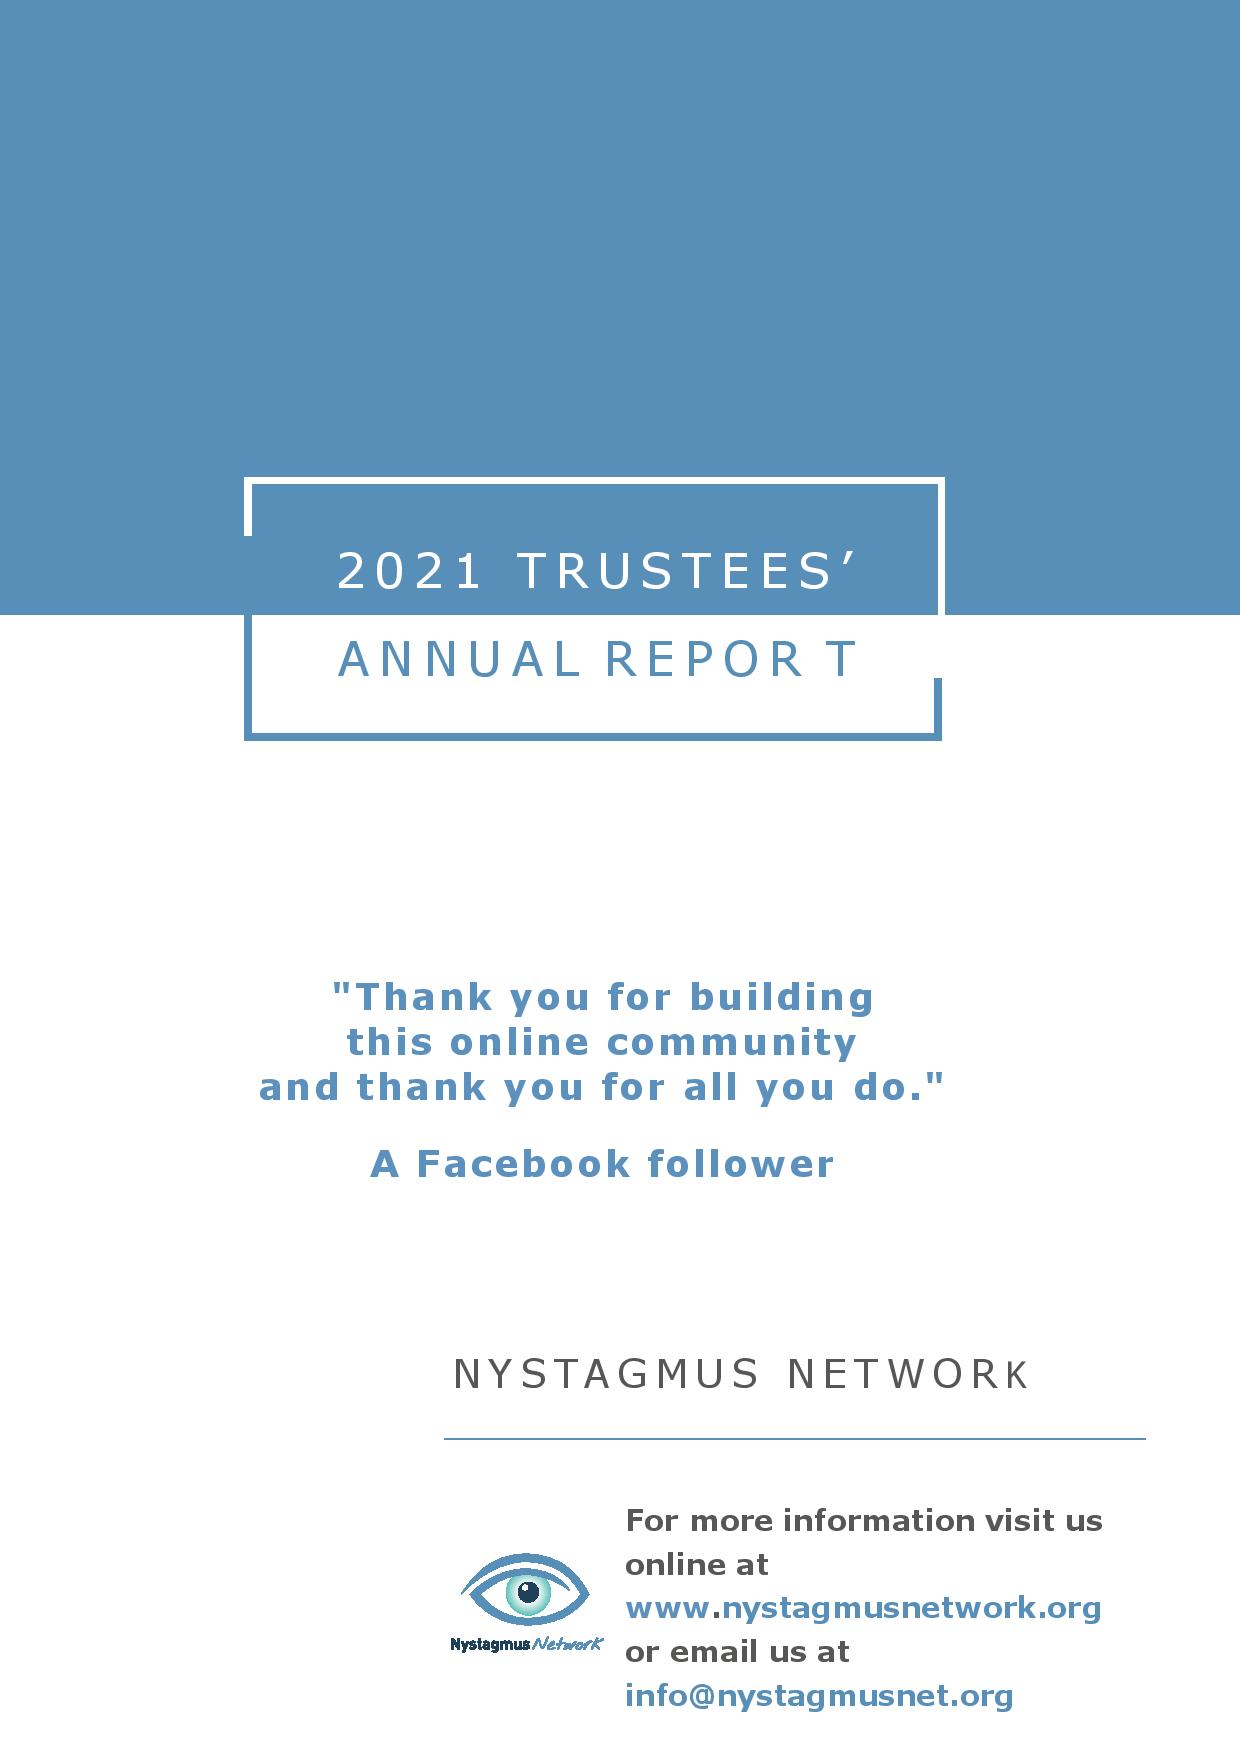 We publish our Annual Report 2021